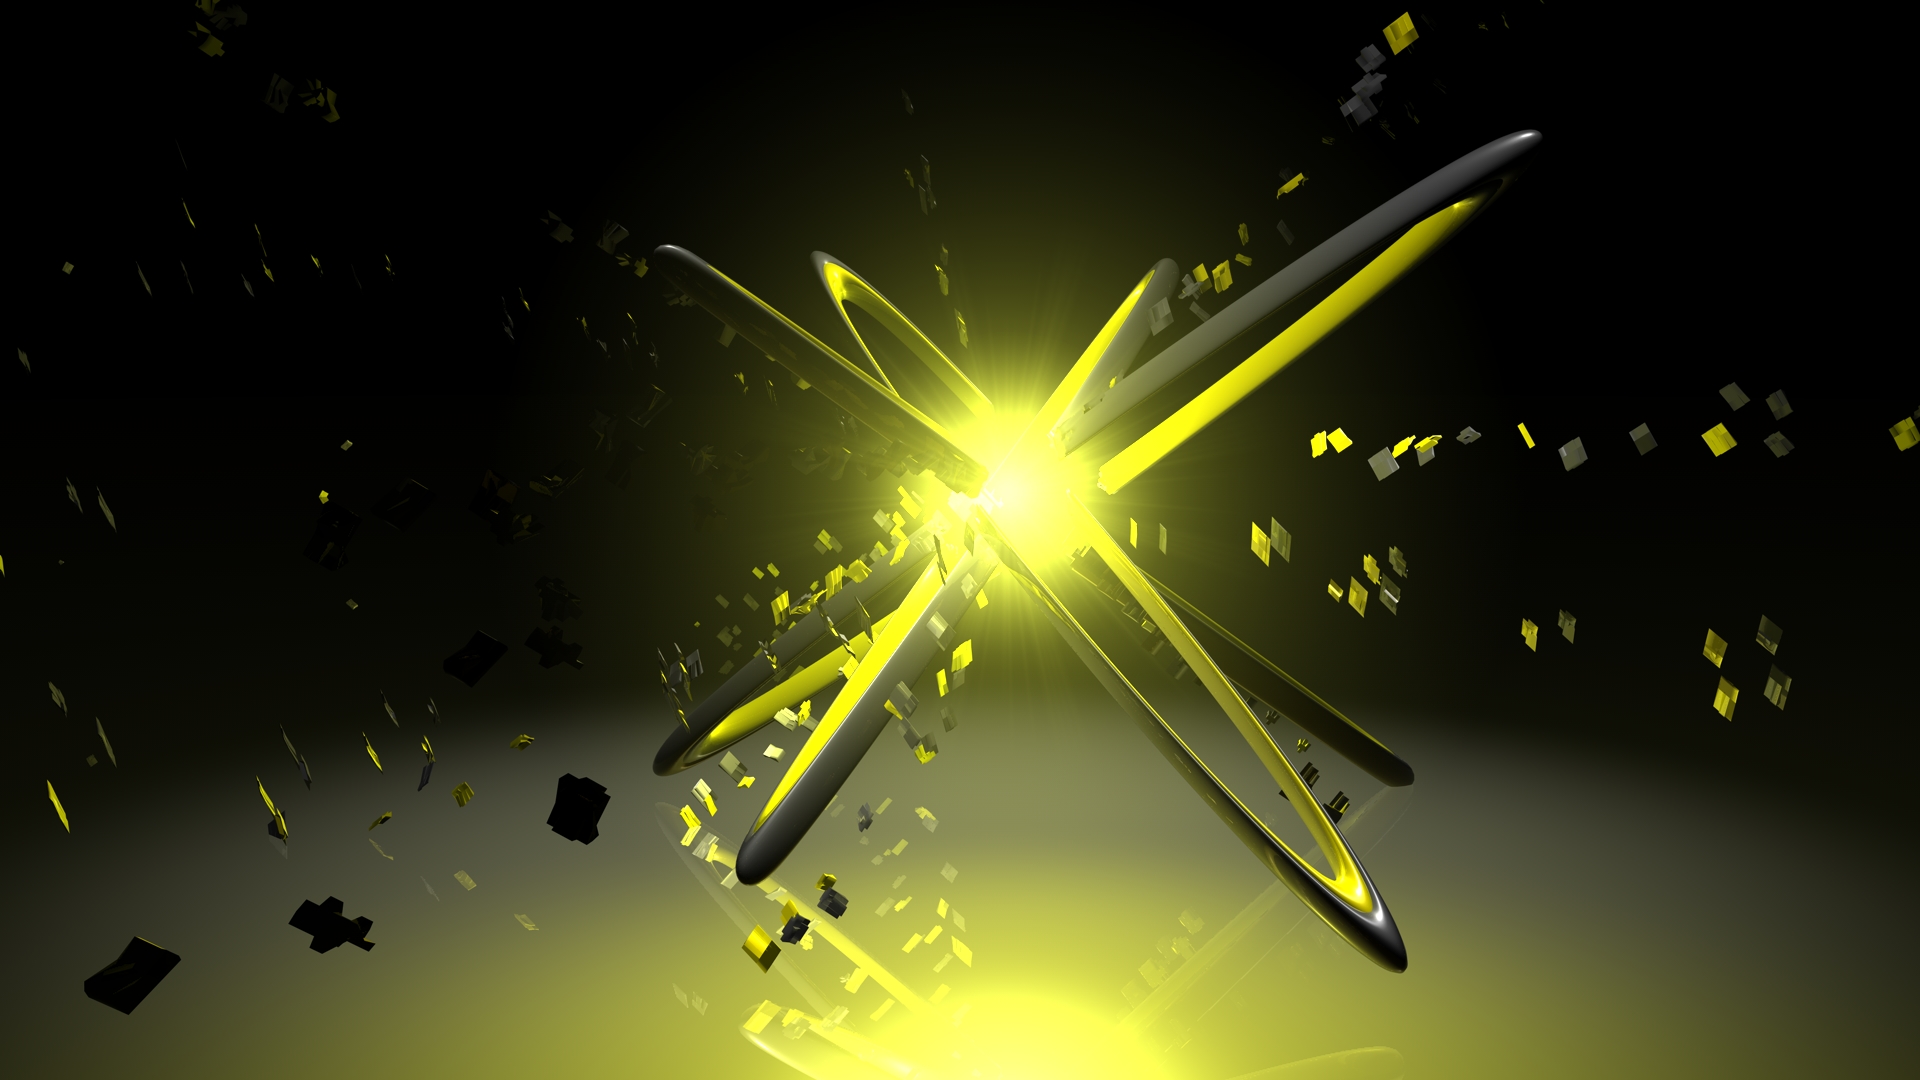  Black  And Yellow  Wallpapers  6 Free Hd  Wallpaper  